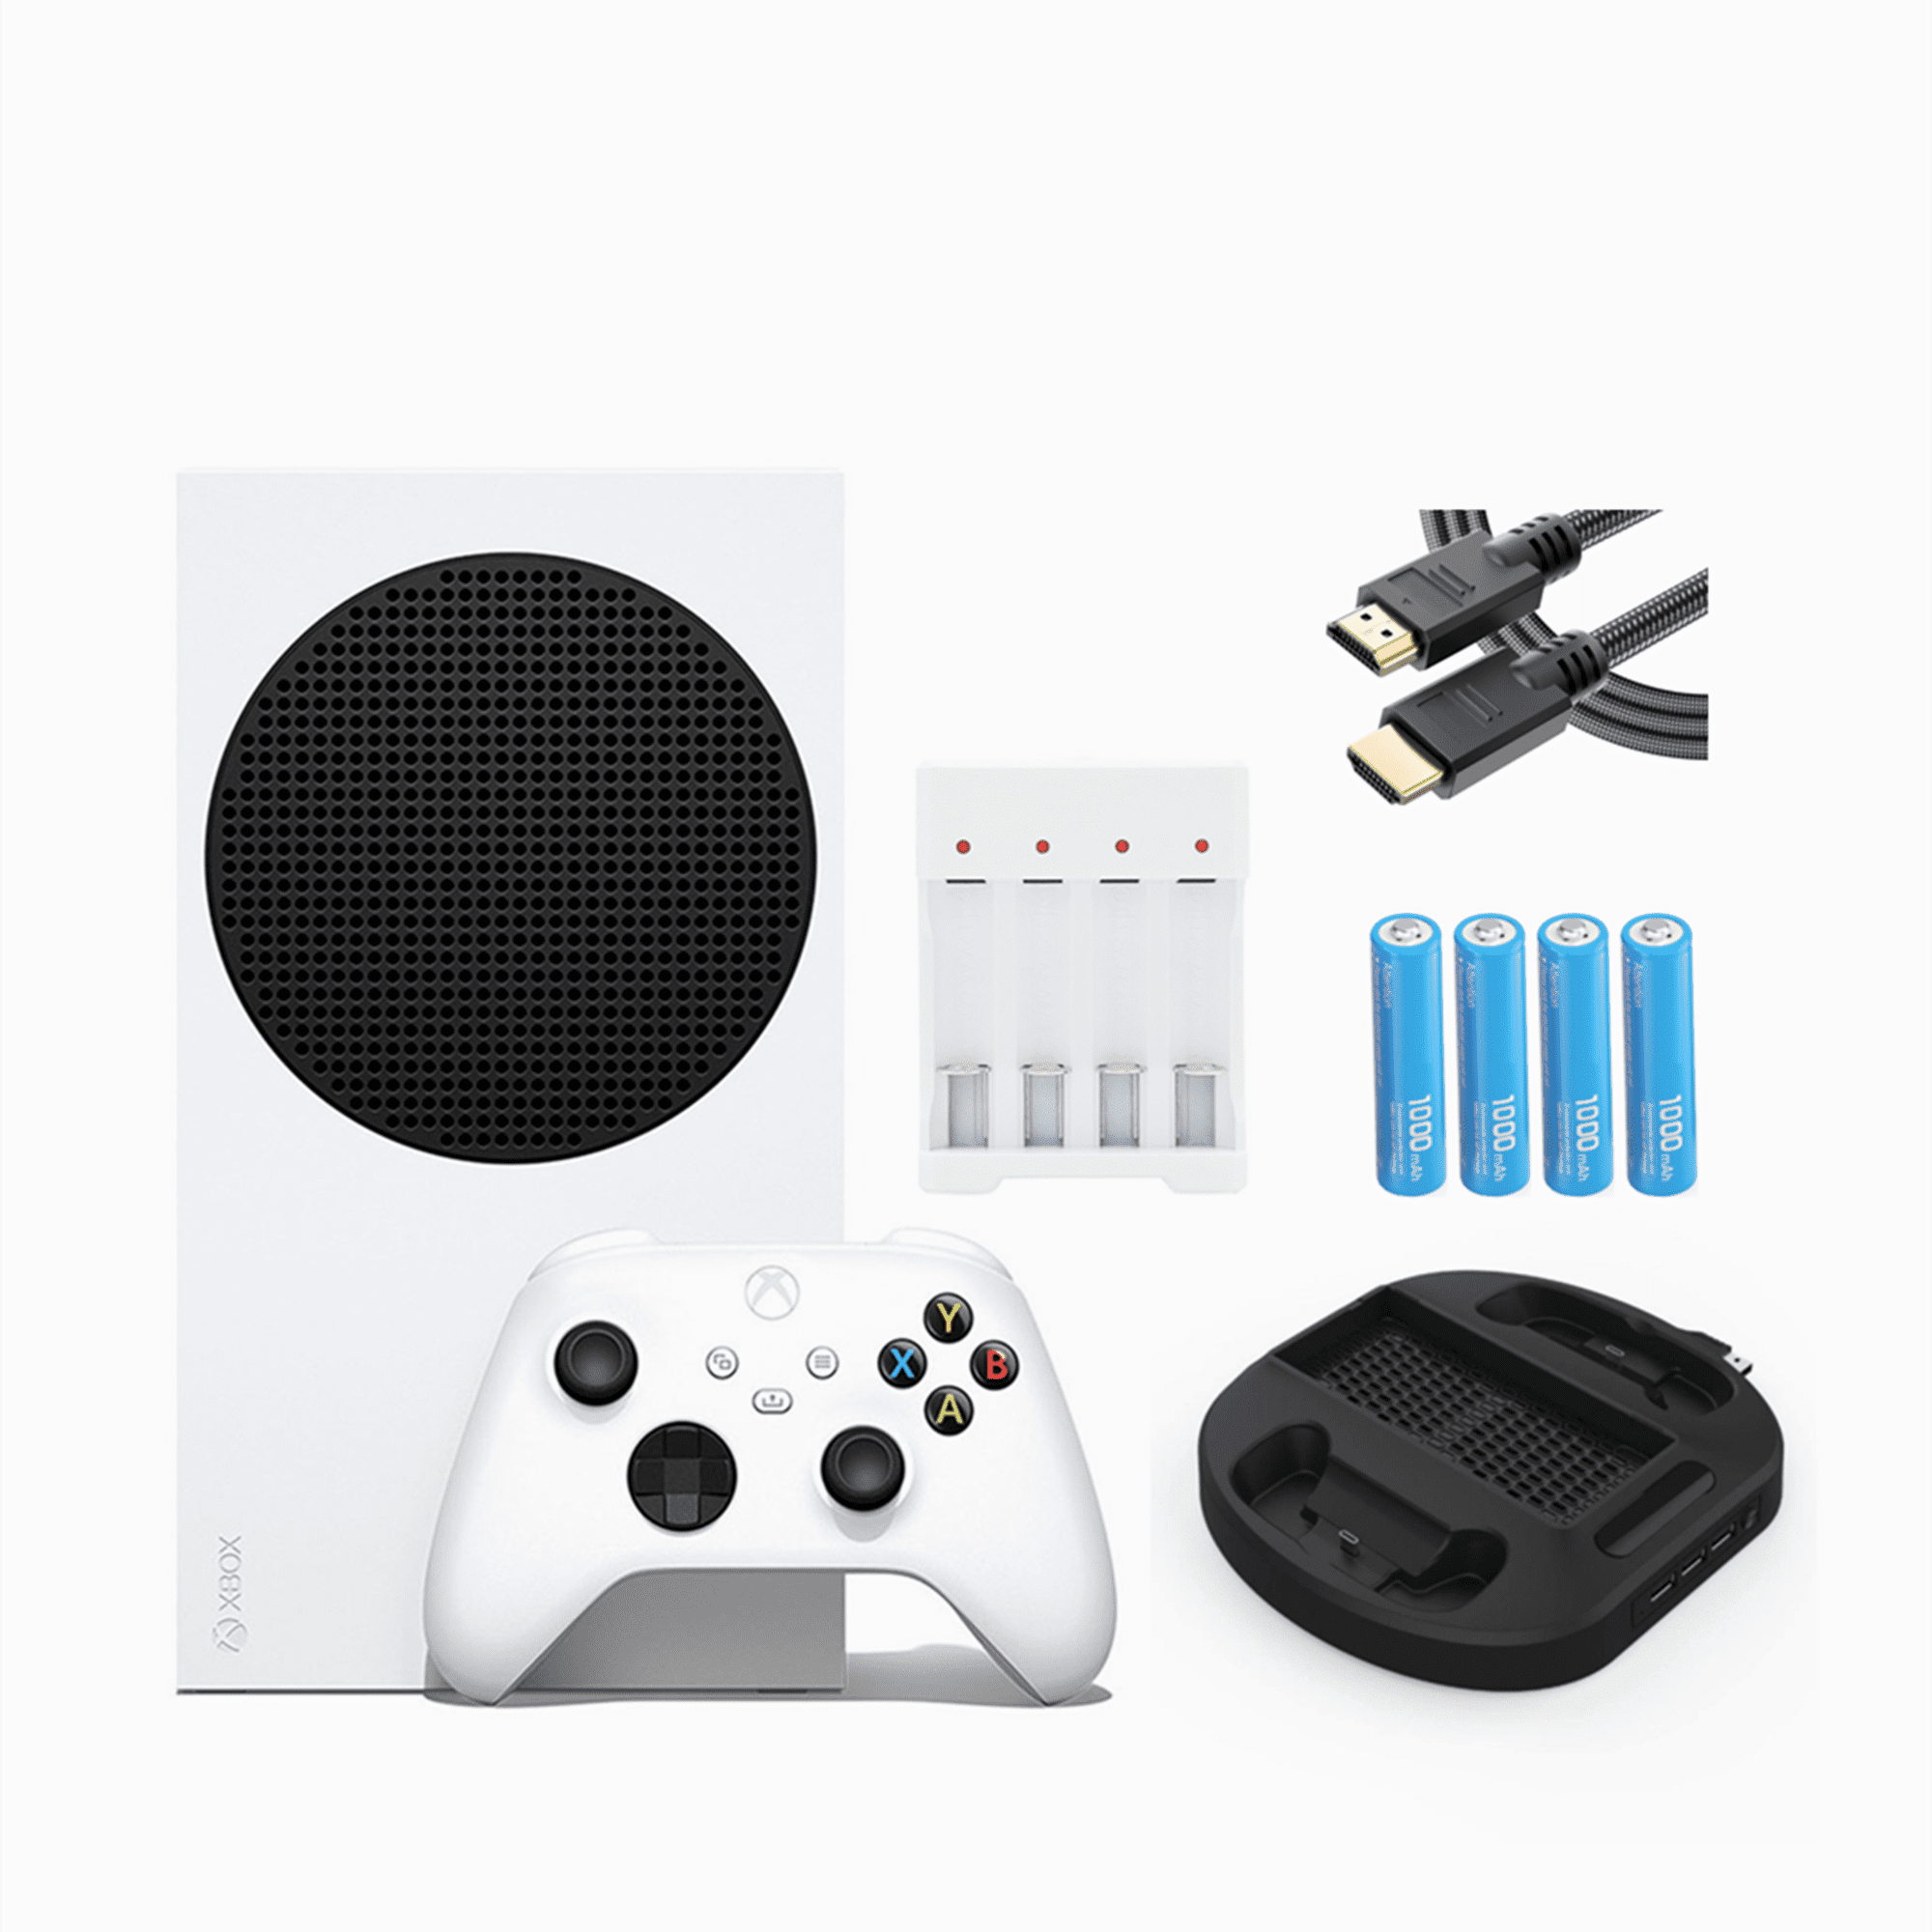 Werkelijk Samengroeiing Verbinding verbroken Microsoft Xbox Series S All-Digital 512 GB Console White (Disc-Free  Gaming), One Xbox Wireless Controller, 1440p Resolution, Up to 120FPS,  Wi-Fi, w/a Cooling Fan, HDMI Cable and more - Walmart.com